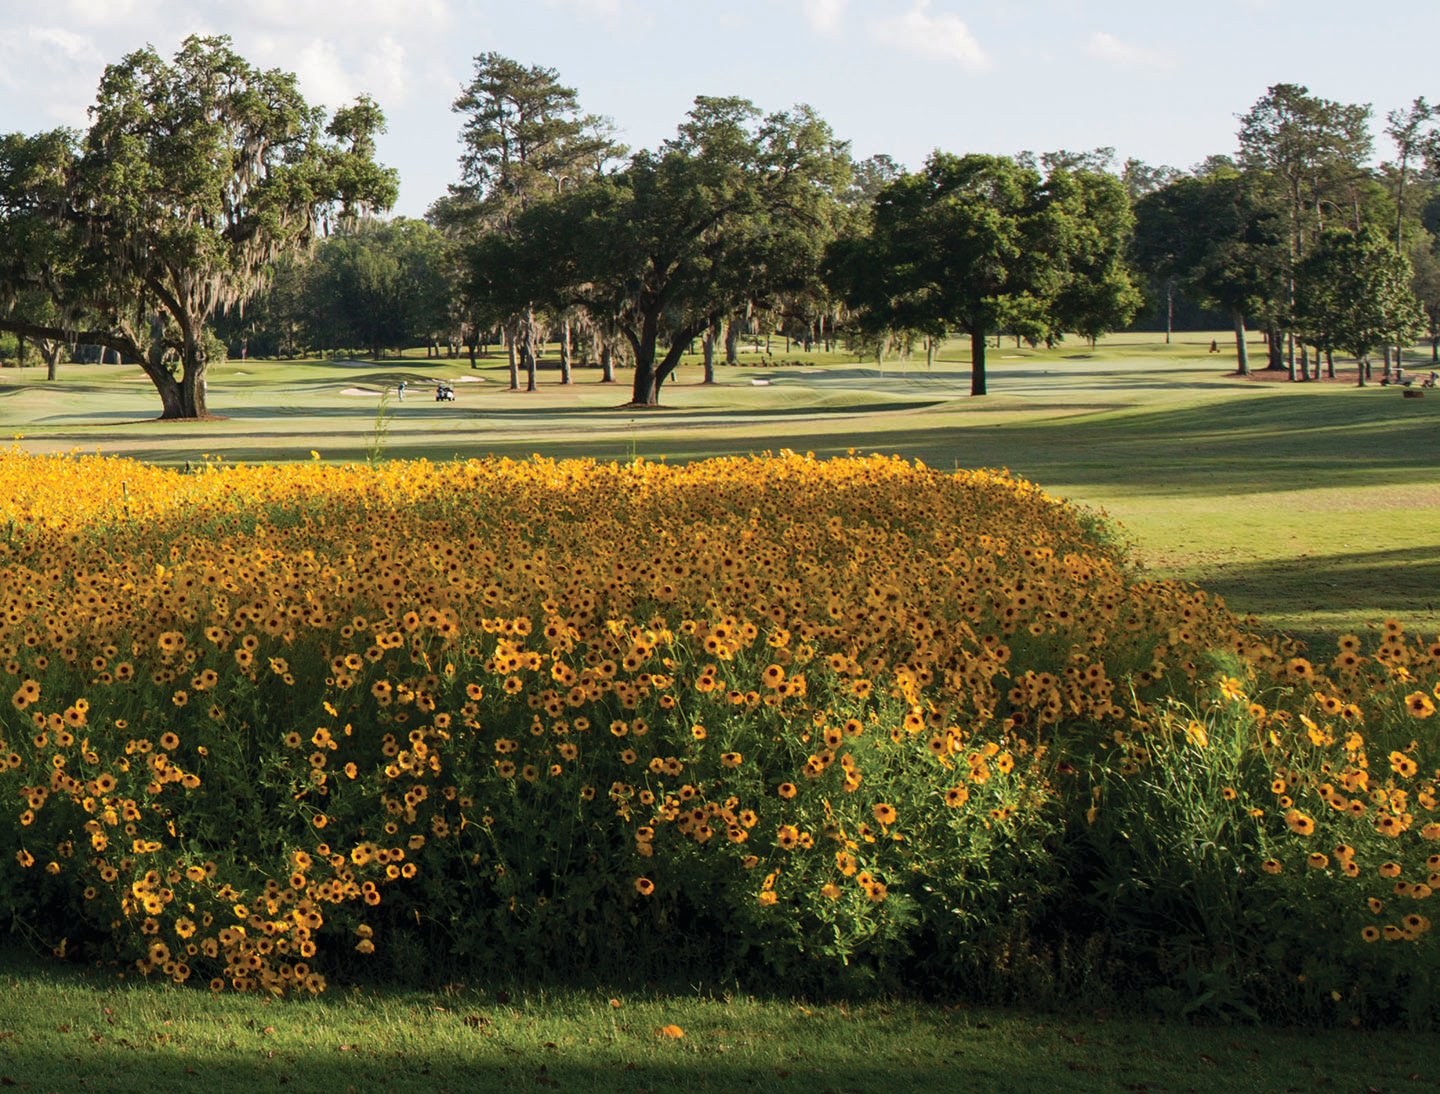 Wildflowers encourage native pollination on golf courses.